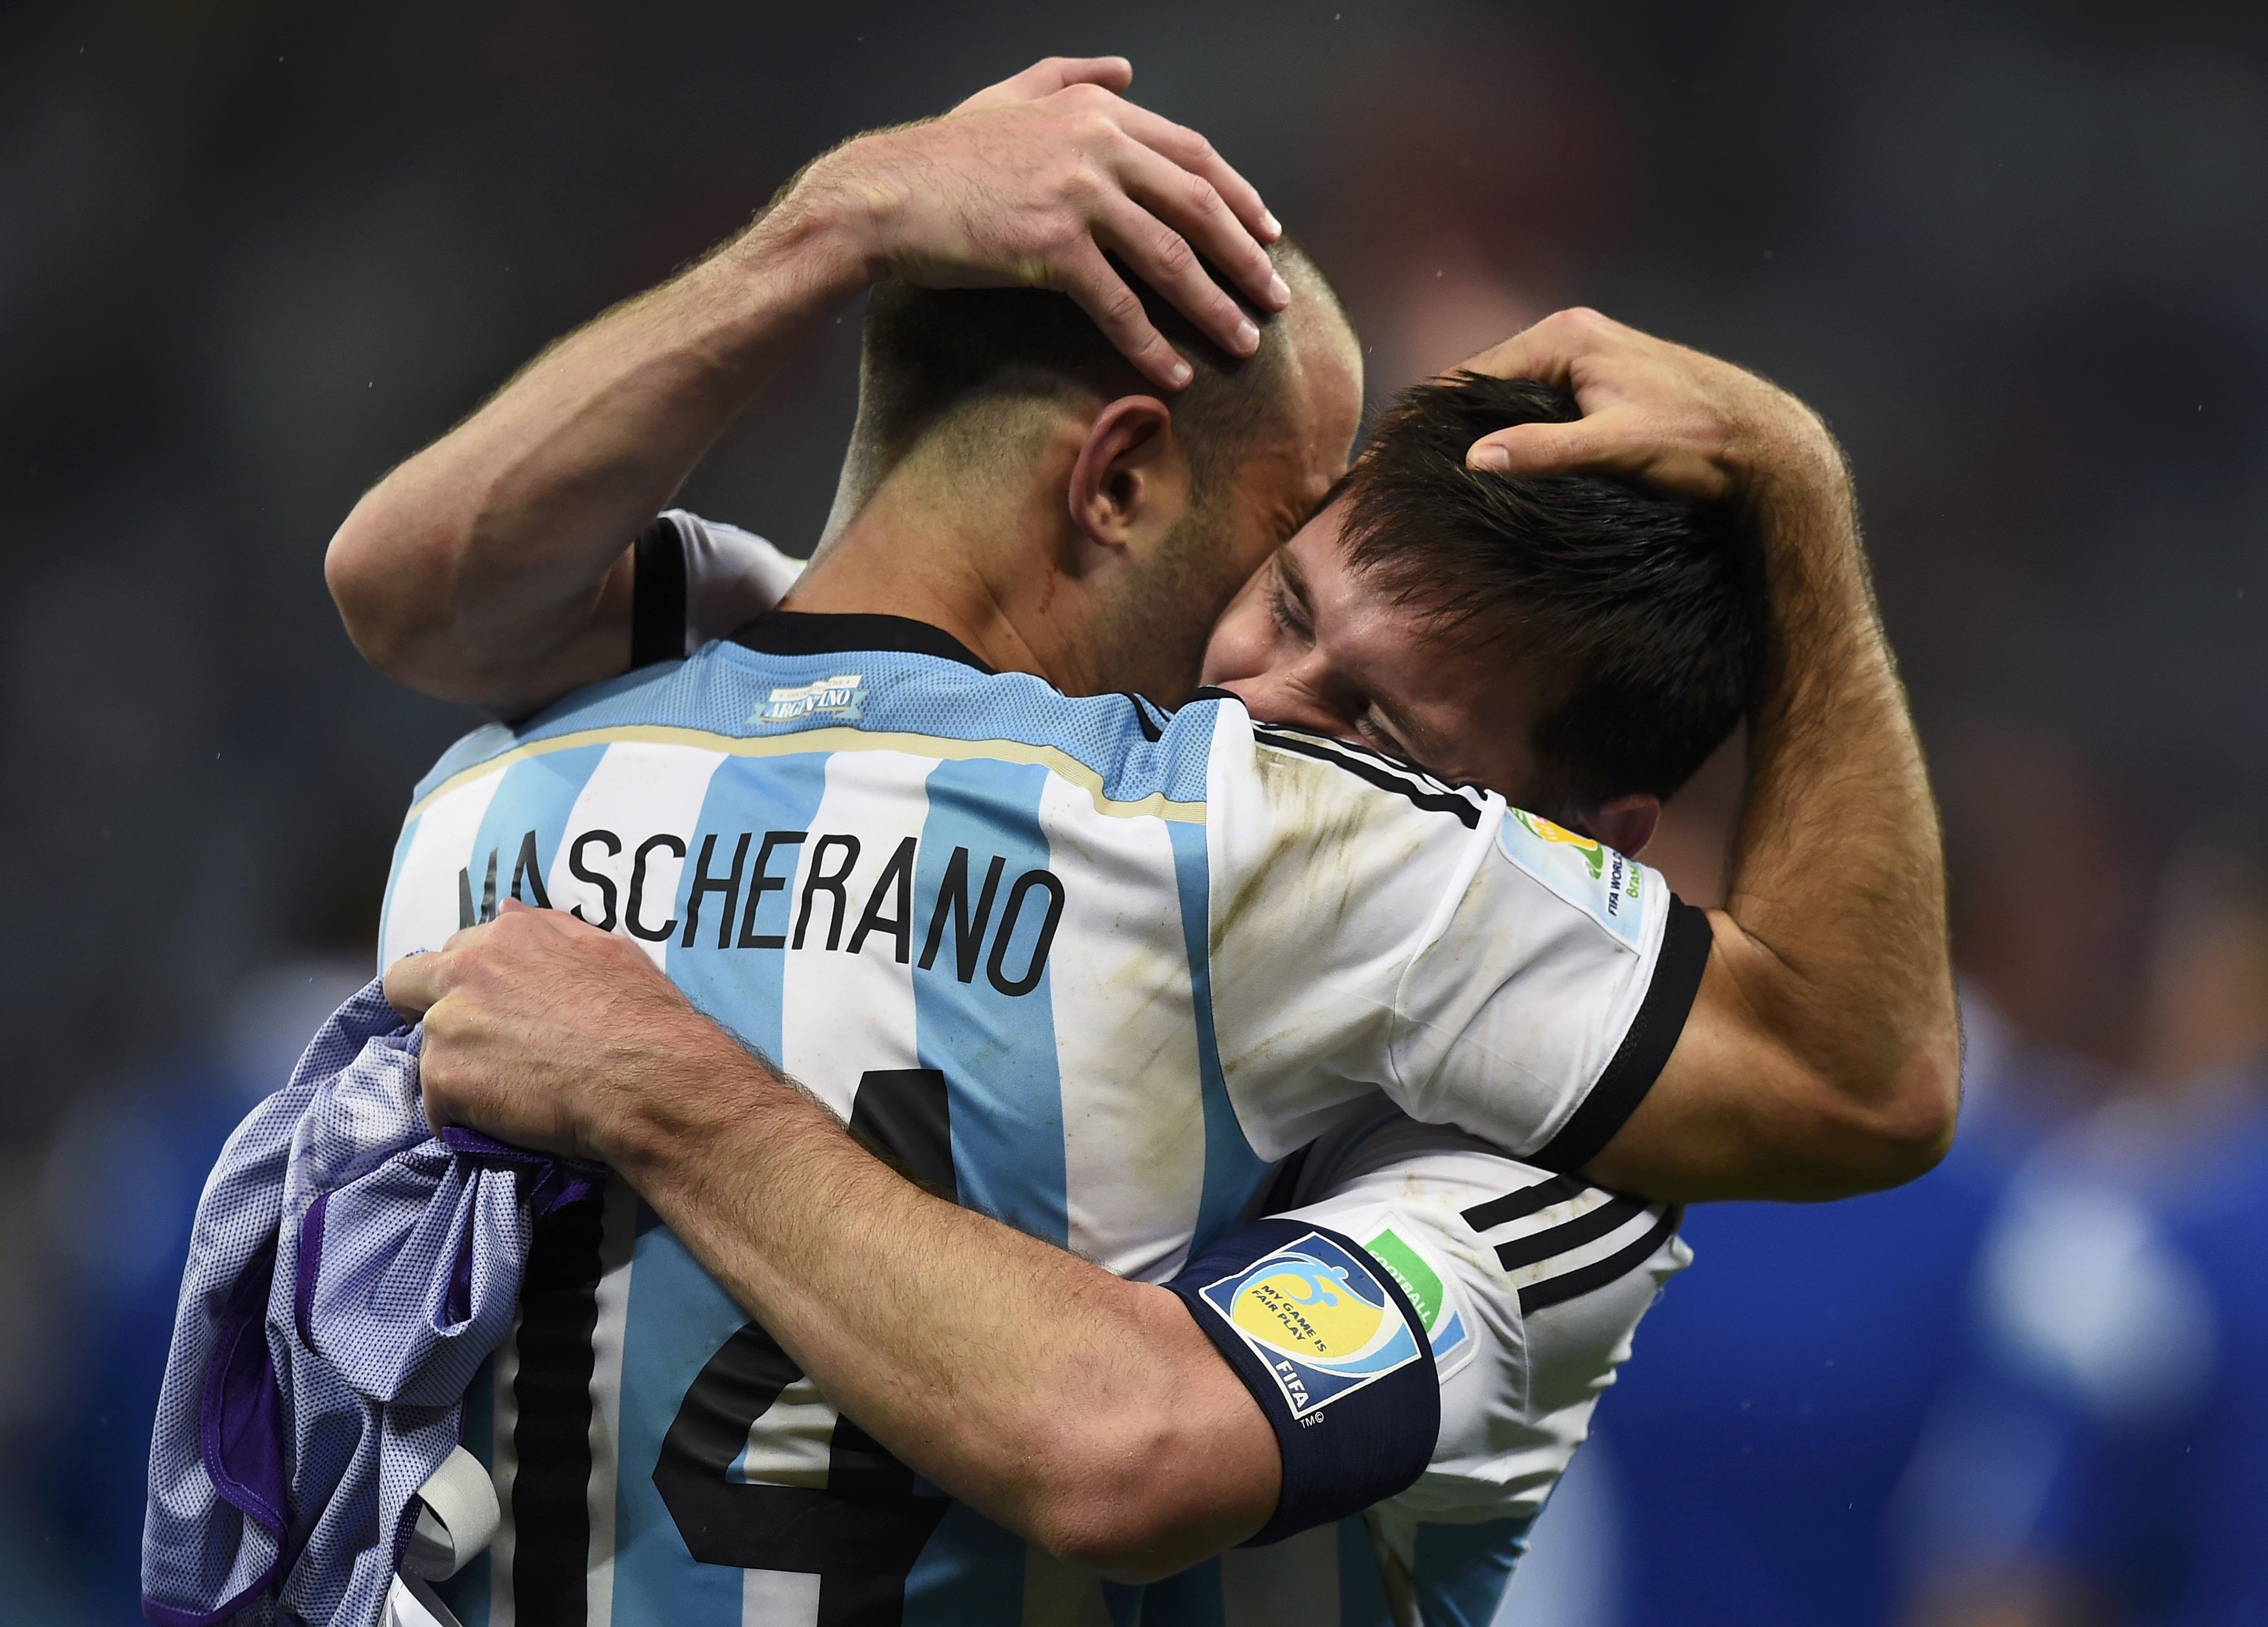 Argentina's Javier Mascherano hugs teammate Lionel Messi (back) after their team's victory over the Netherlands at the end of their 2014 World Cup semi-finals at the Corinthians arena in Sao Paulo July 9, 2014. REUTERS/Dylan Martinez (BRAZIL  - Tags: SOCC